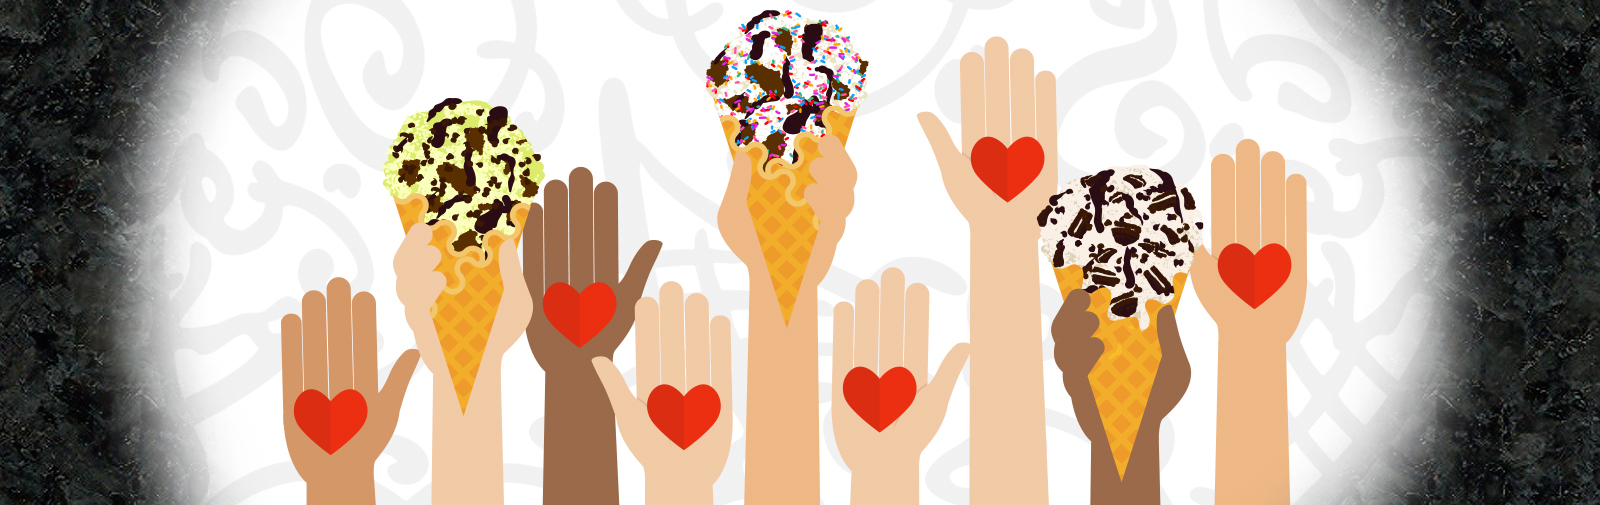 Decorative Illustration of hands holding hearts and waffle cones filled with ice cream